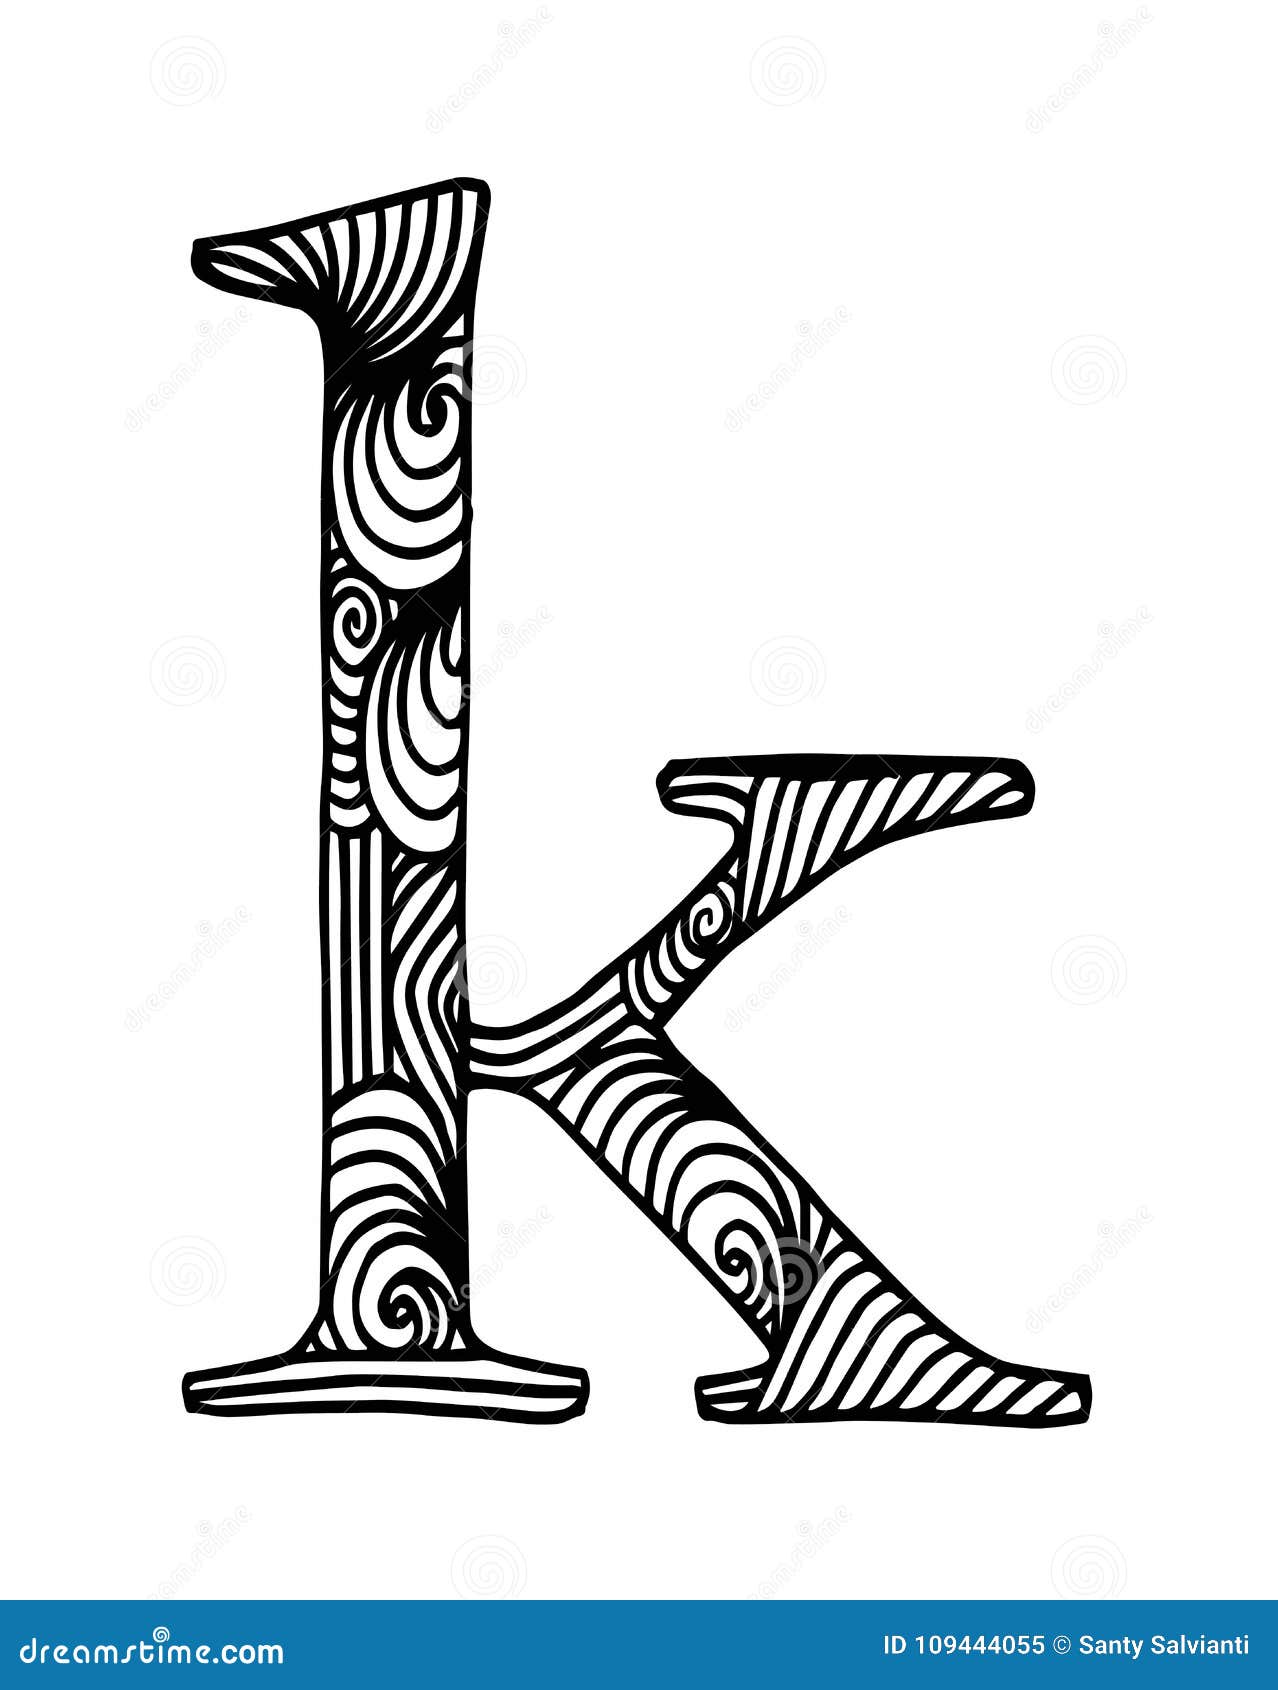 Zentangle Stylized Alphabet Letter K In Doodle Style Hand Drawn